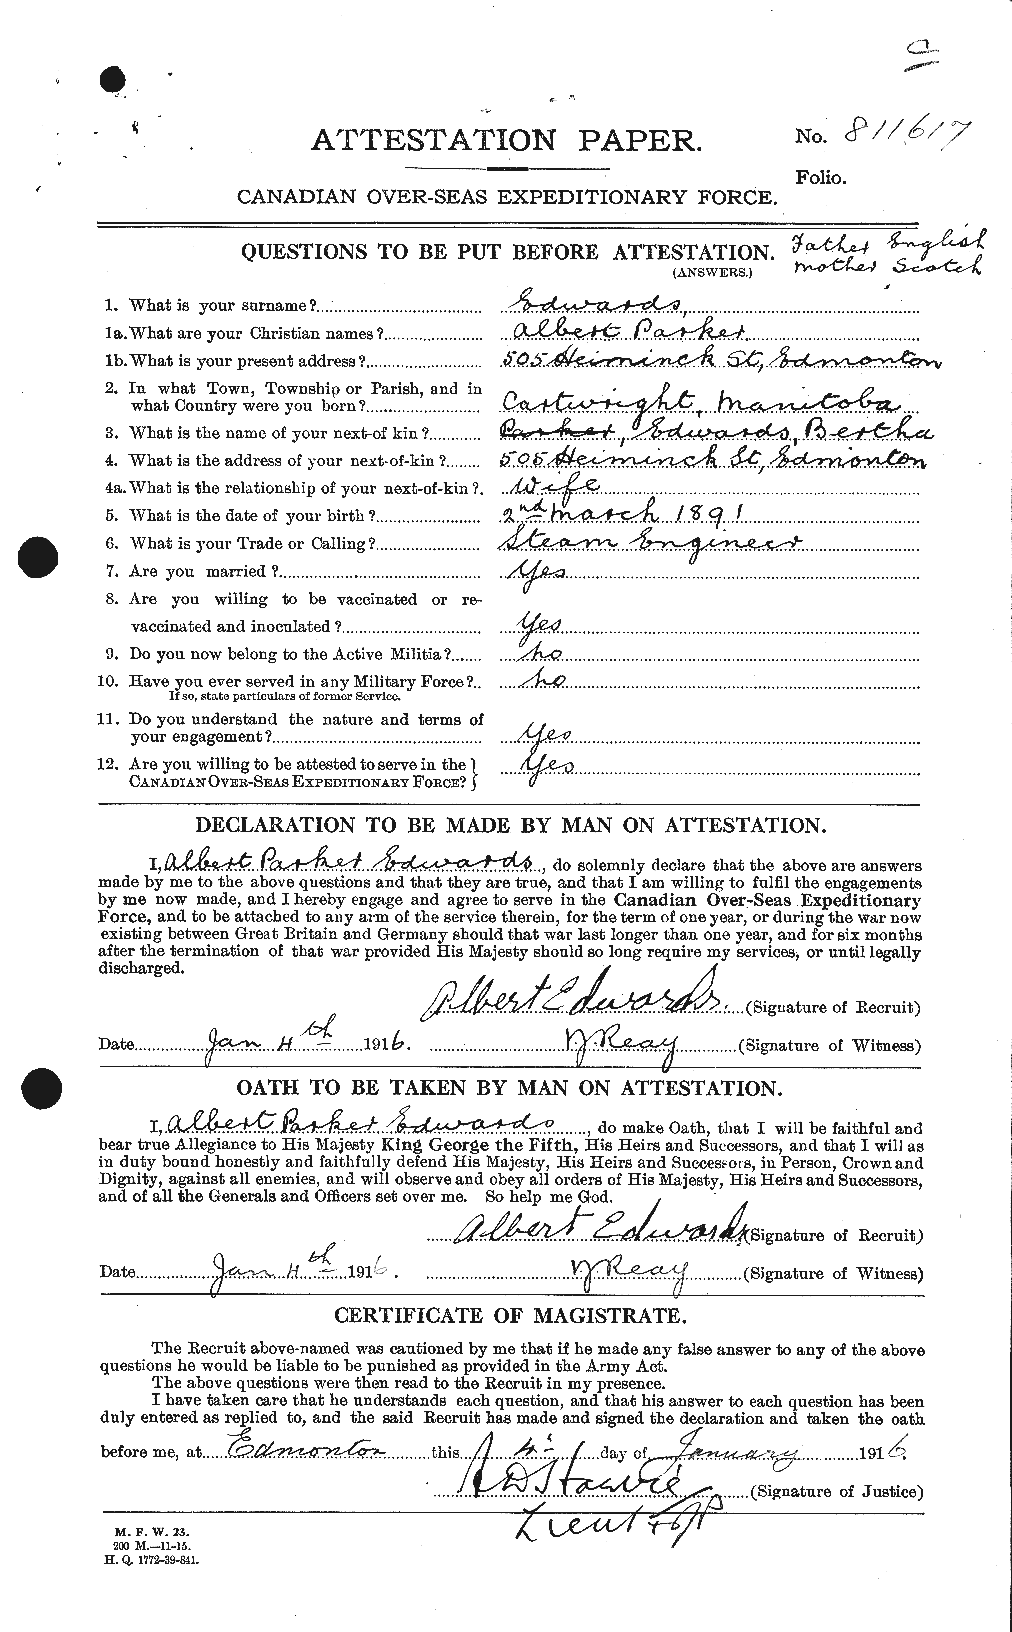 Personnel Records of the First World War - CEF 313095a